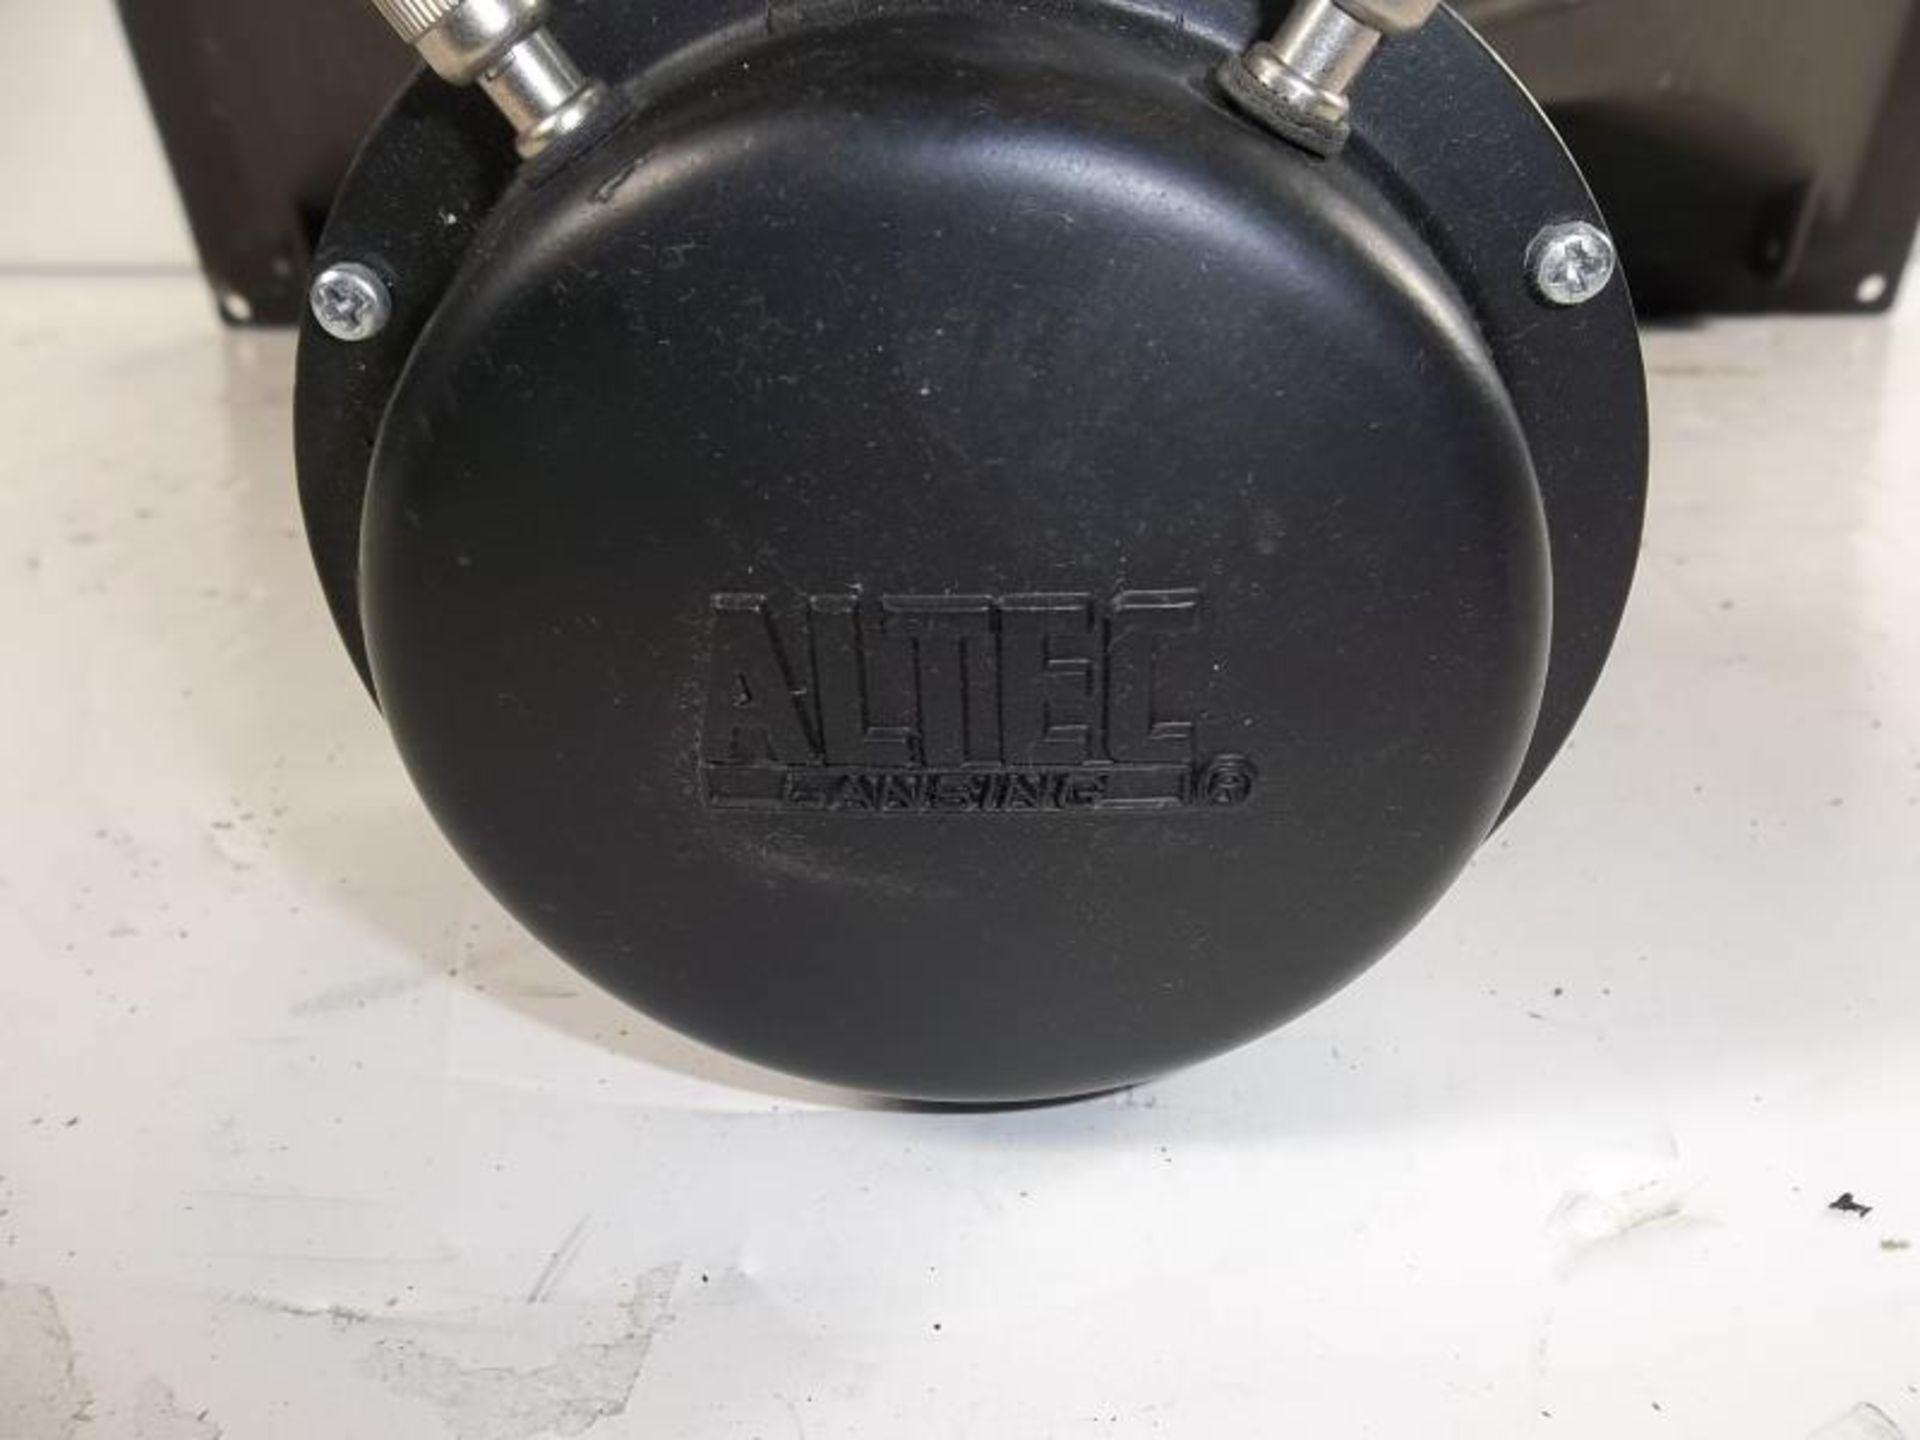 2 Altec theatre horns, black, driver is 808-A, horn is 26" x 10.5" - Image 7 of 7